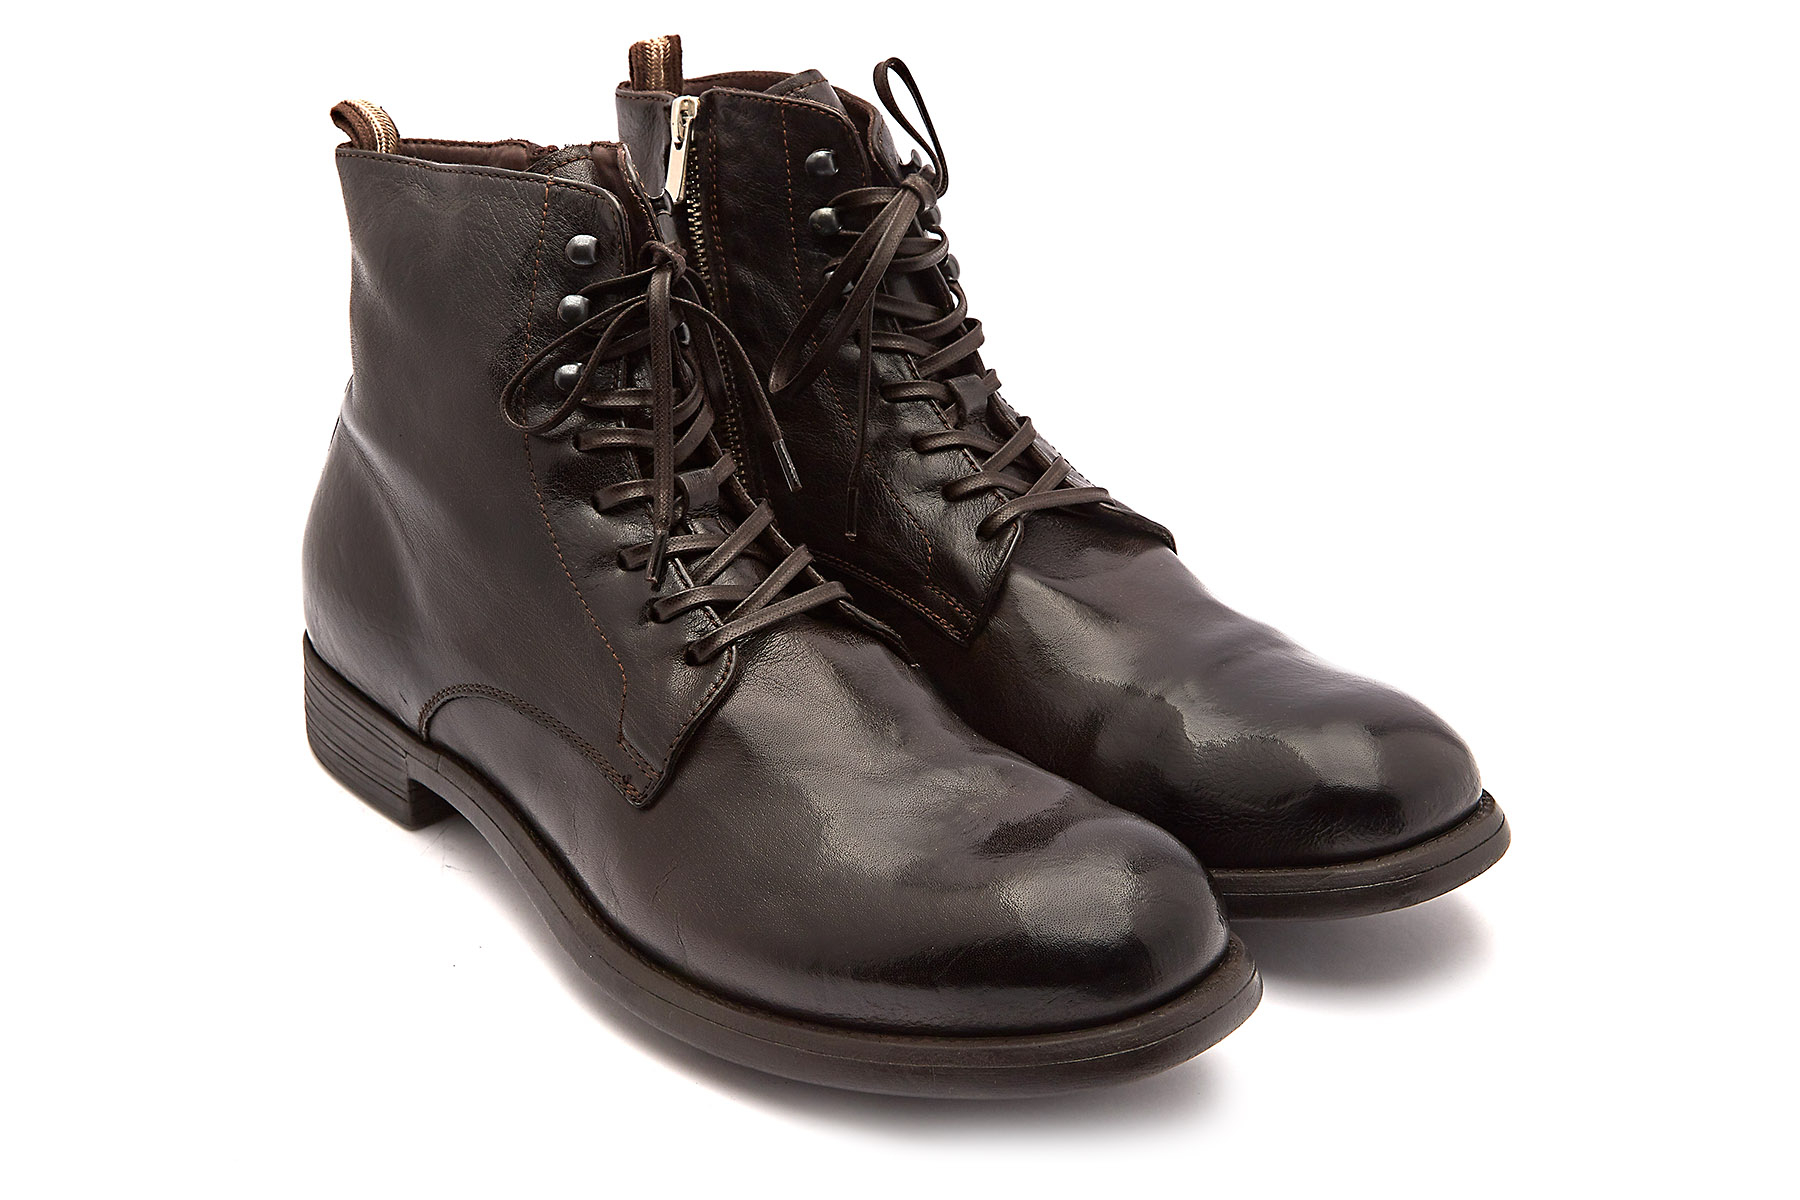 Men's Lace Up Boots OFFICINE CREATIVE Chronicle 004 Eban | Apia